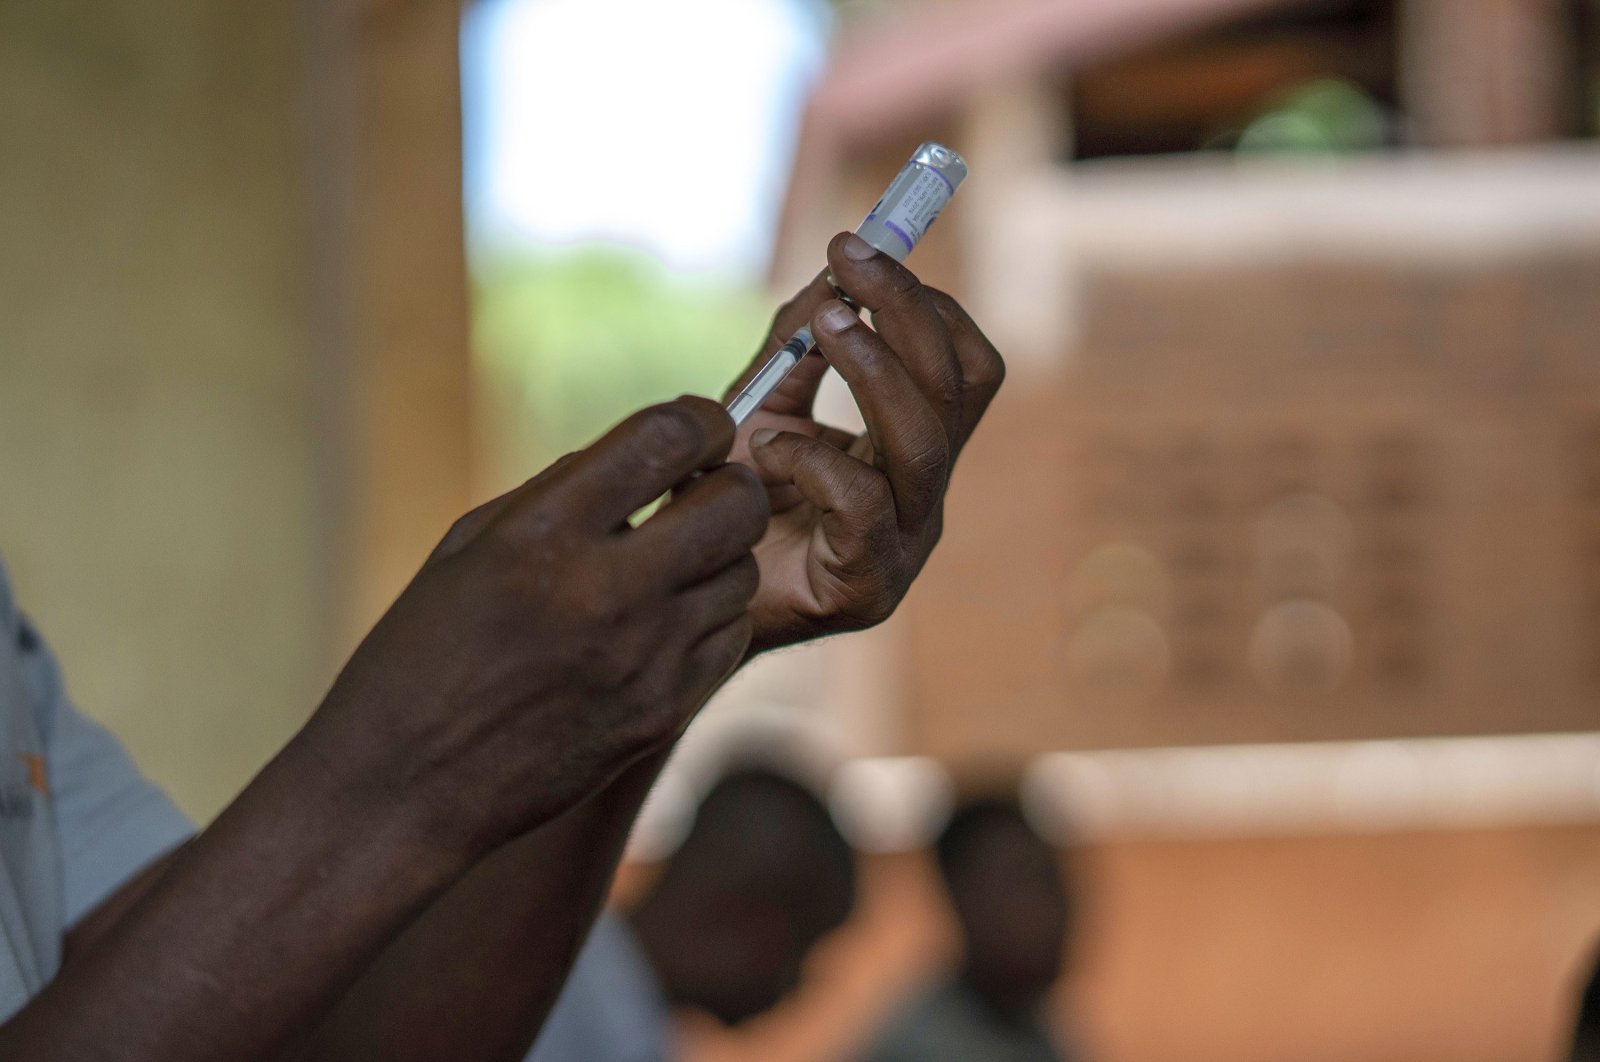 Health officials prepare to vaccine residents of the Malawi village of Tomali, where young children became test subjects for the world's first vaccine against malaria, Dec. 11, 2019. (AP Photo)